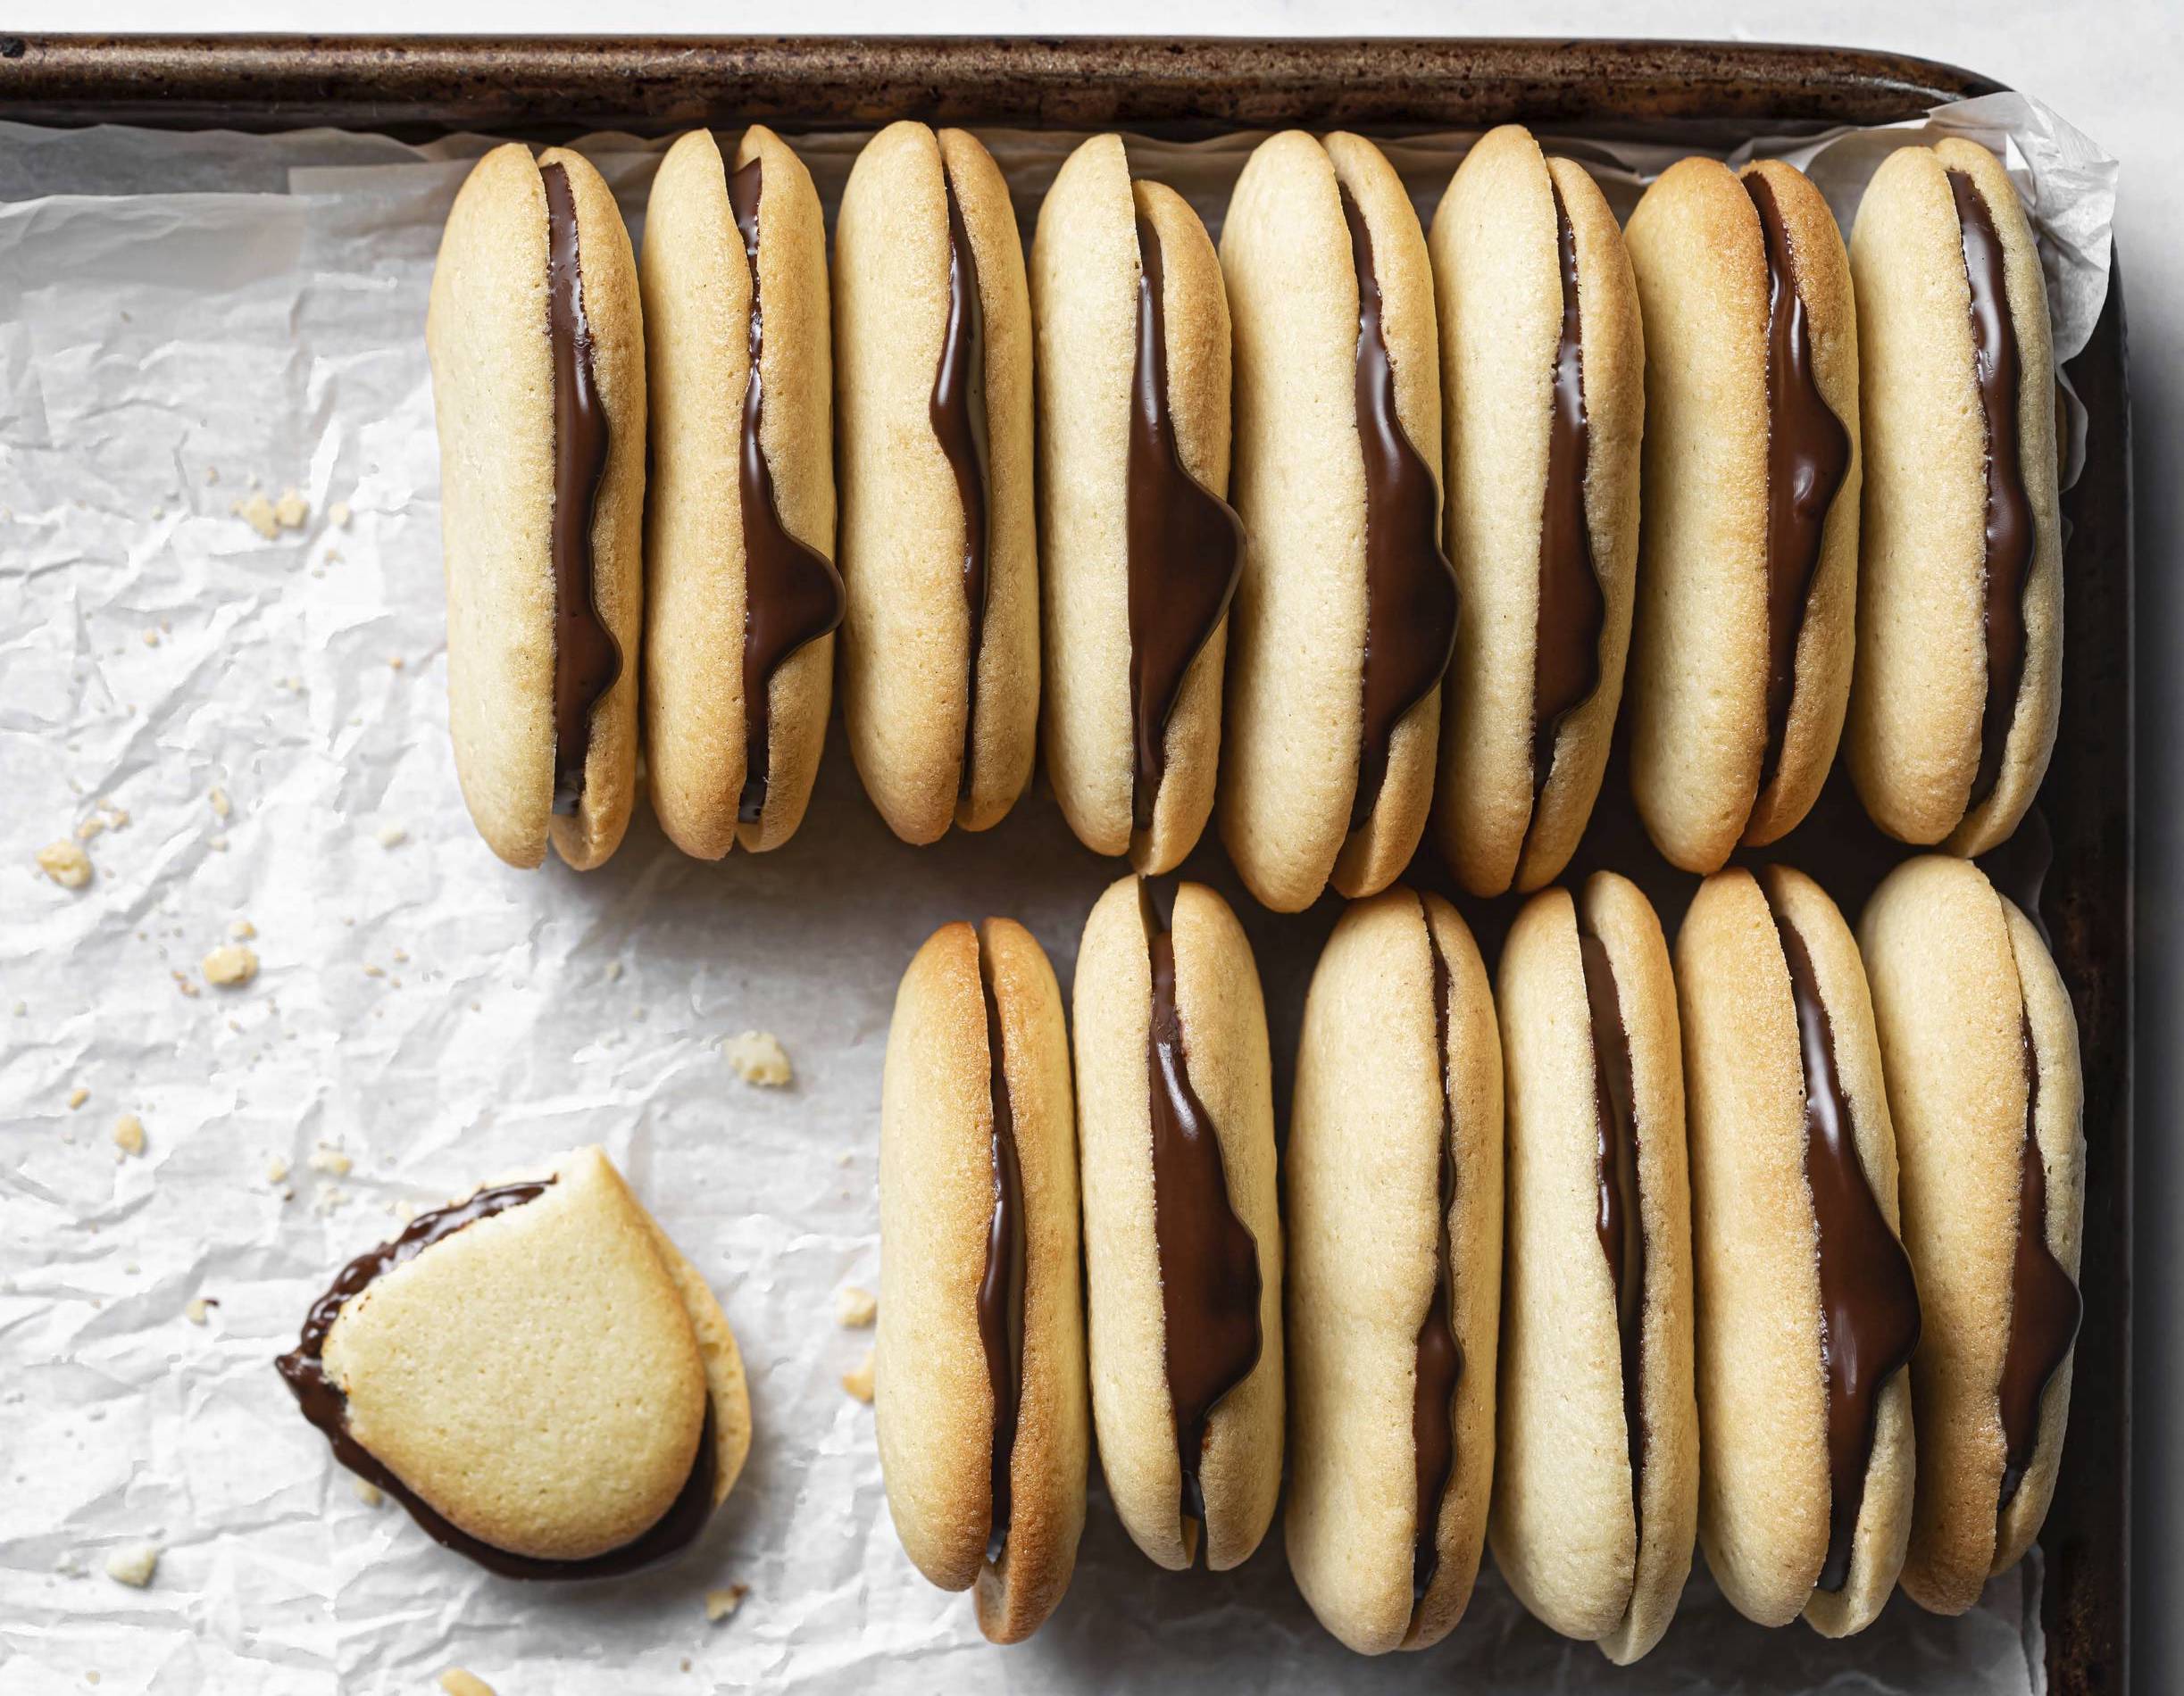 milano cookies by heather mubarak as featured in stuffed: the sandwich cookie book